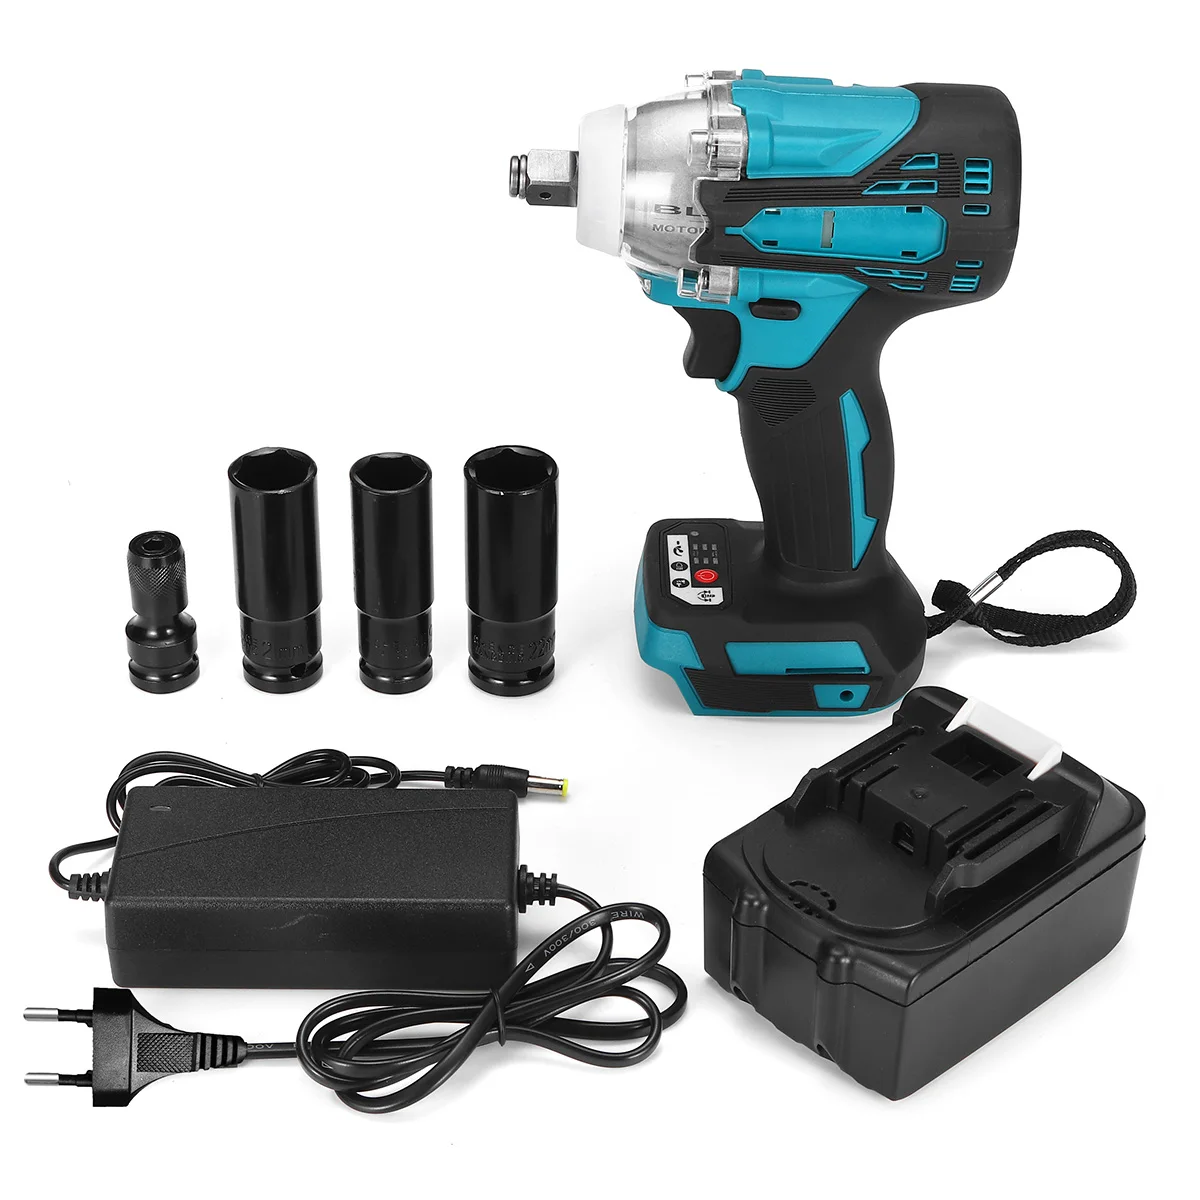 

2023 2022 388vf 800N.m. Brushless Cordless Electric Impact Wrench 1/2 inch Power Tools 15000mAh Li Battery Compatible 18V